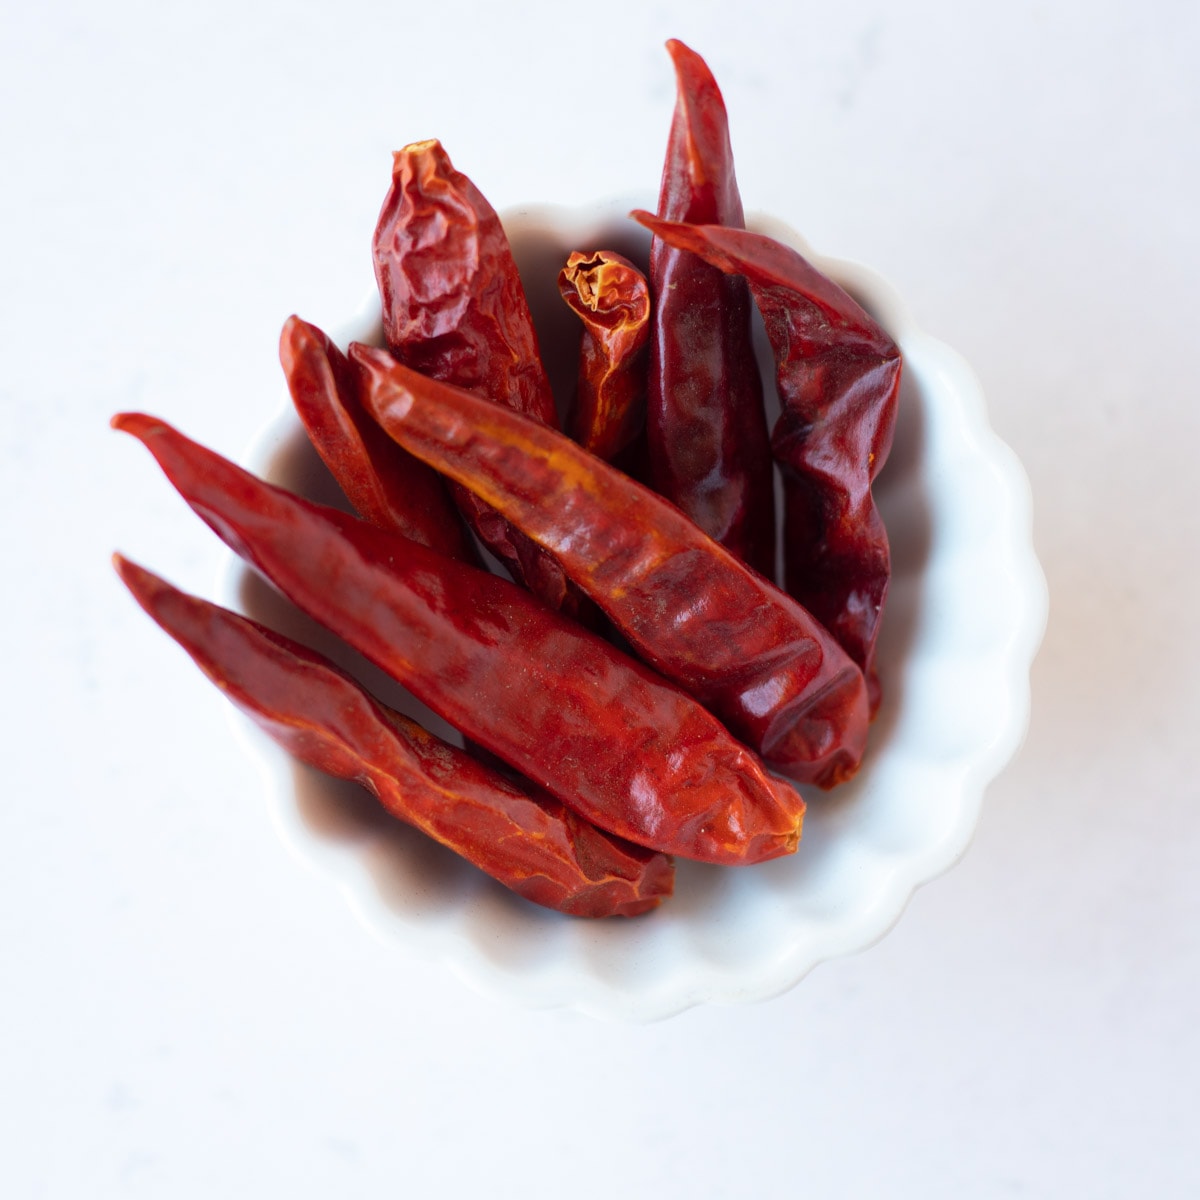 Dried red chili peppers in a small white bowl.